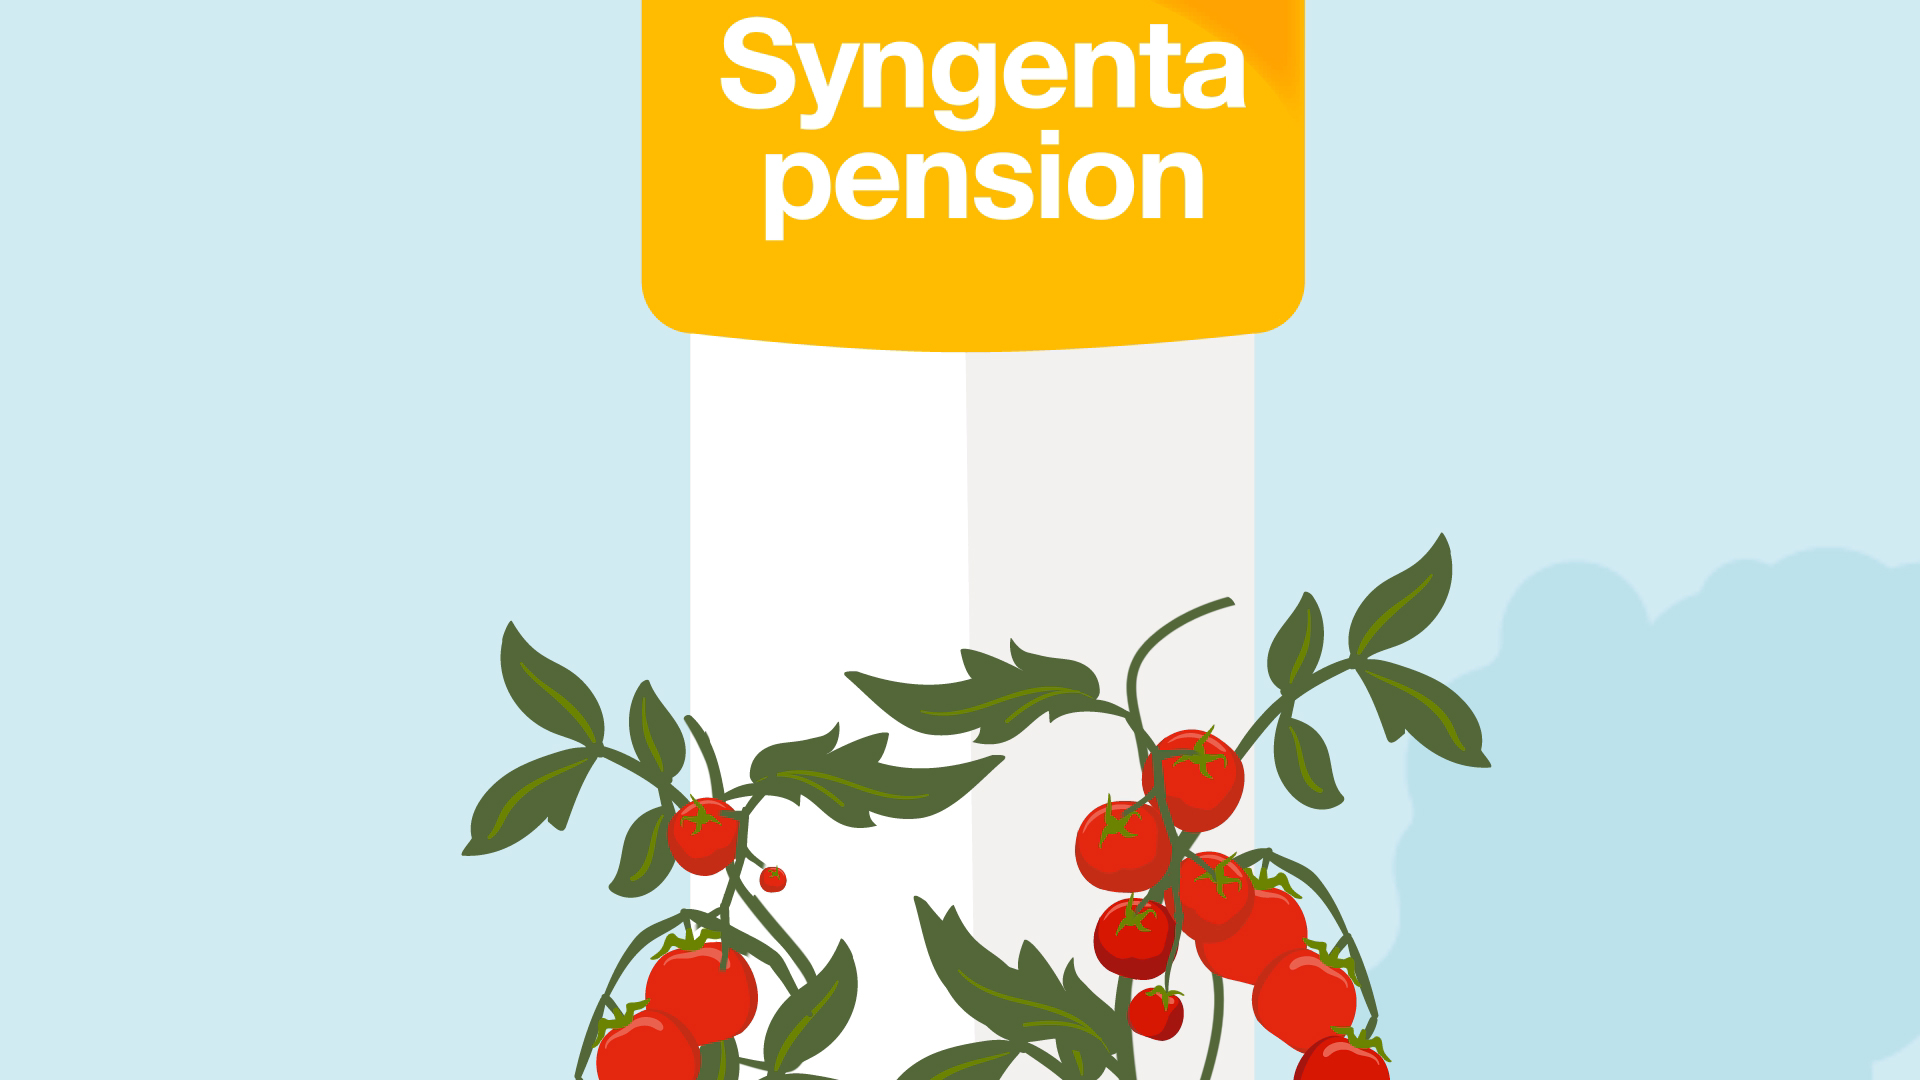 A 2d pillar with tomatoes growing up the pillar with 'Syngenta pension' written at the top